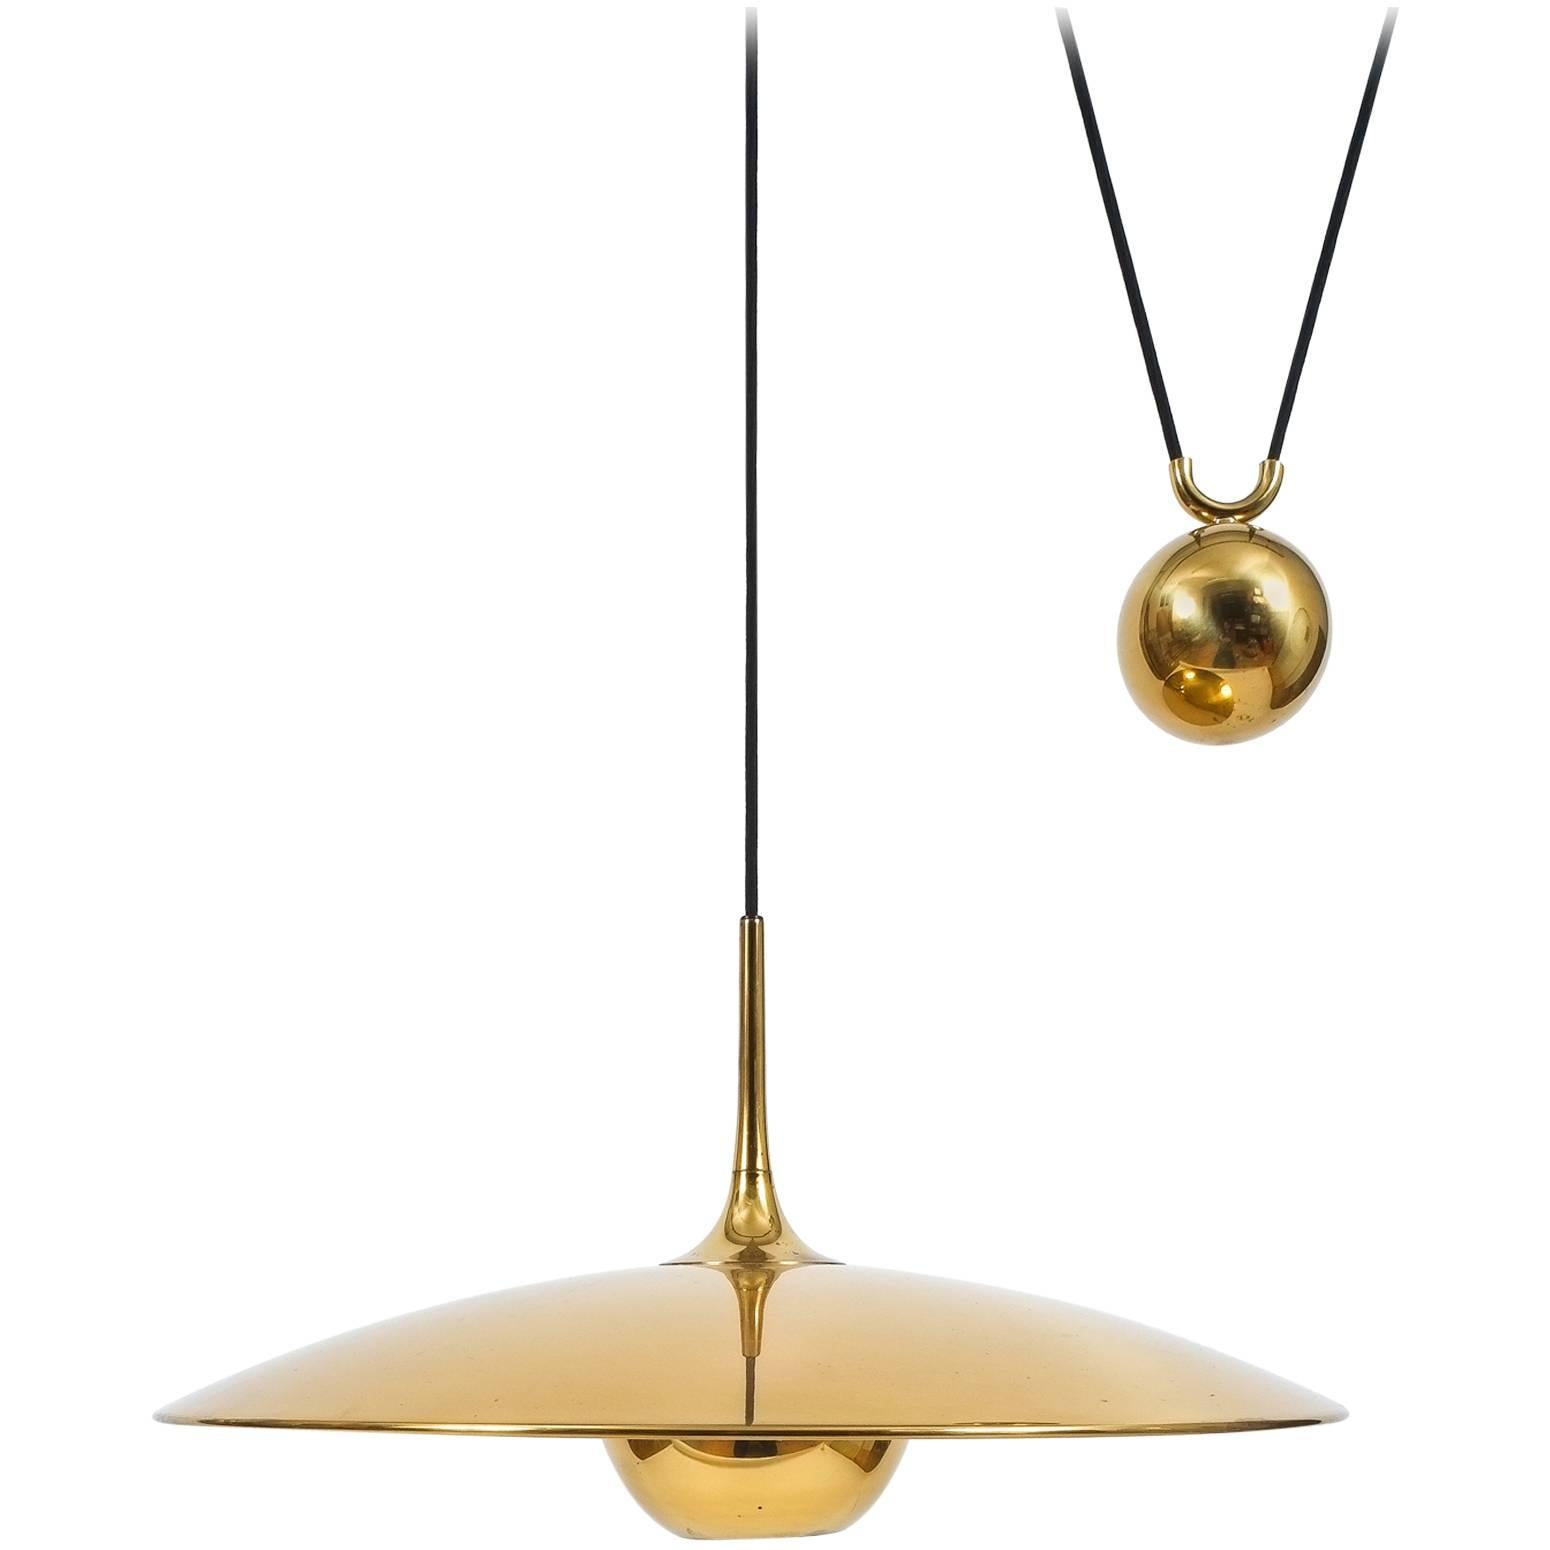 Large Adjustable Polished Brass Counterweight Pendant by Florian Schulz